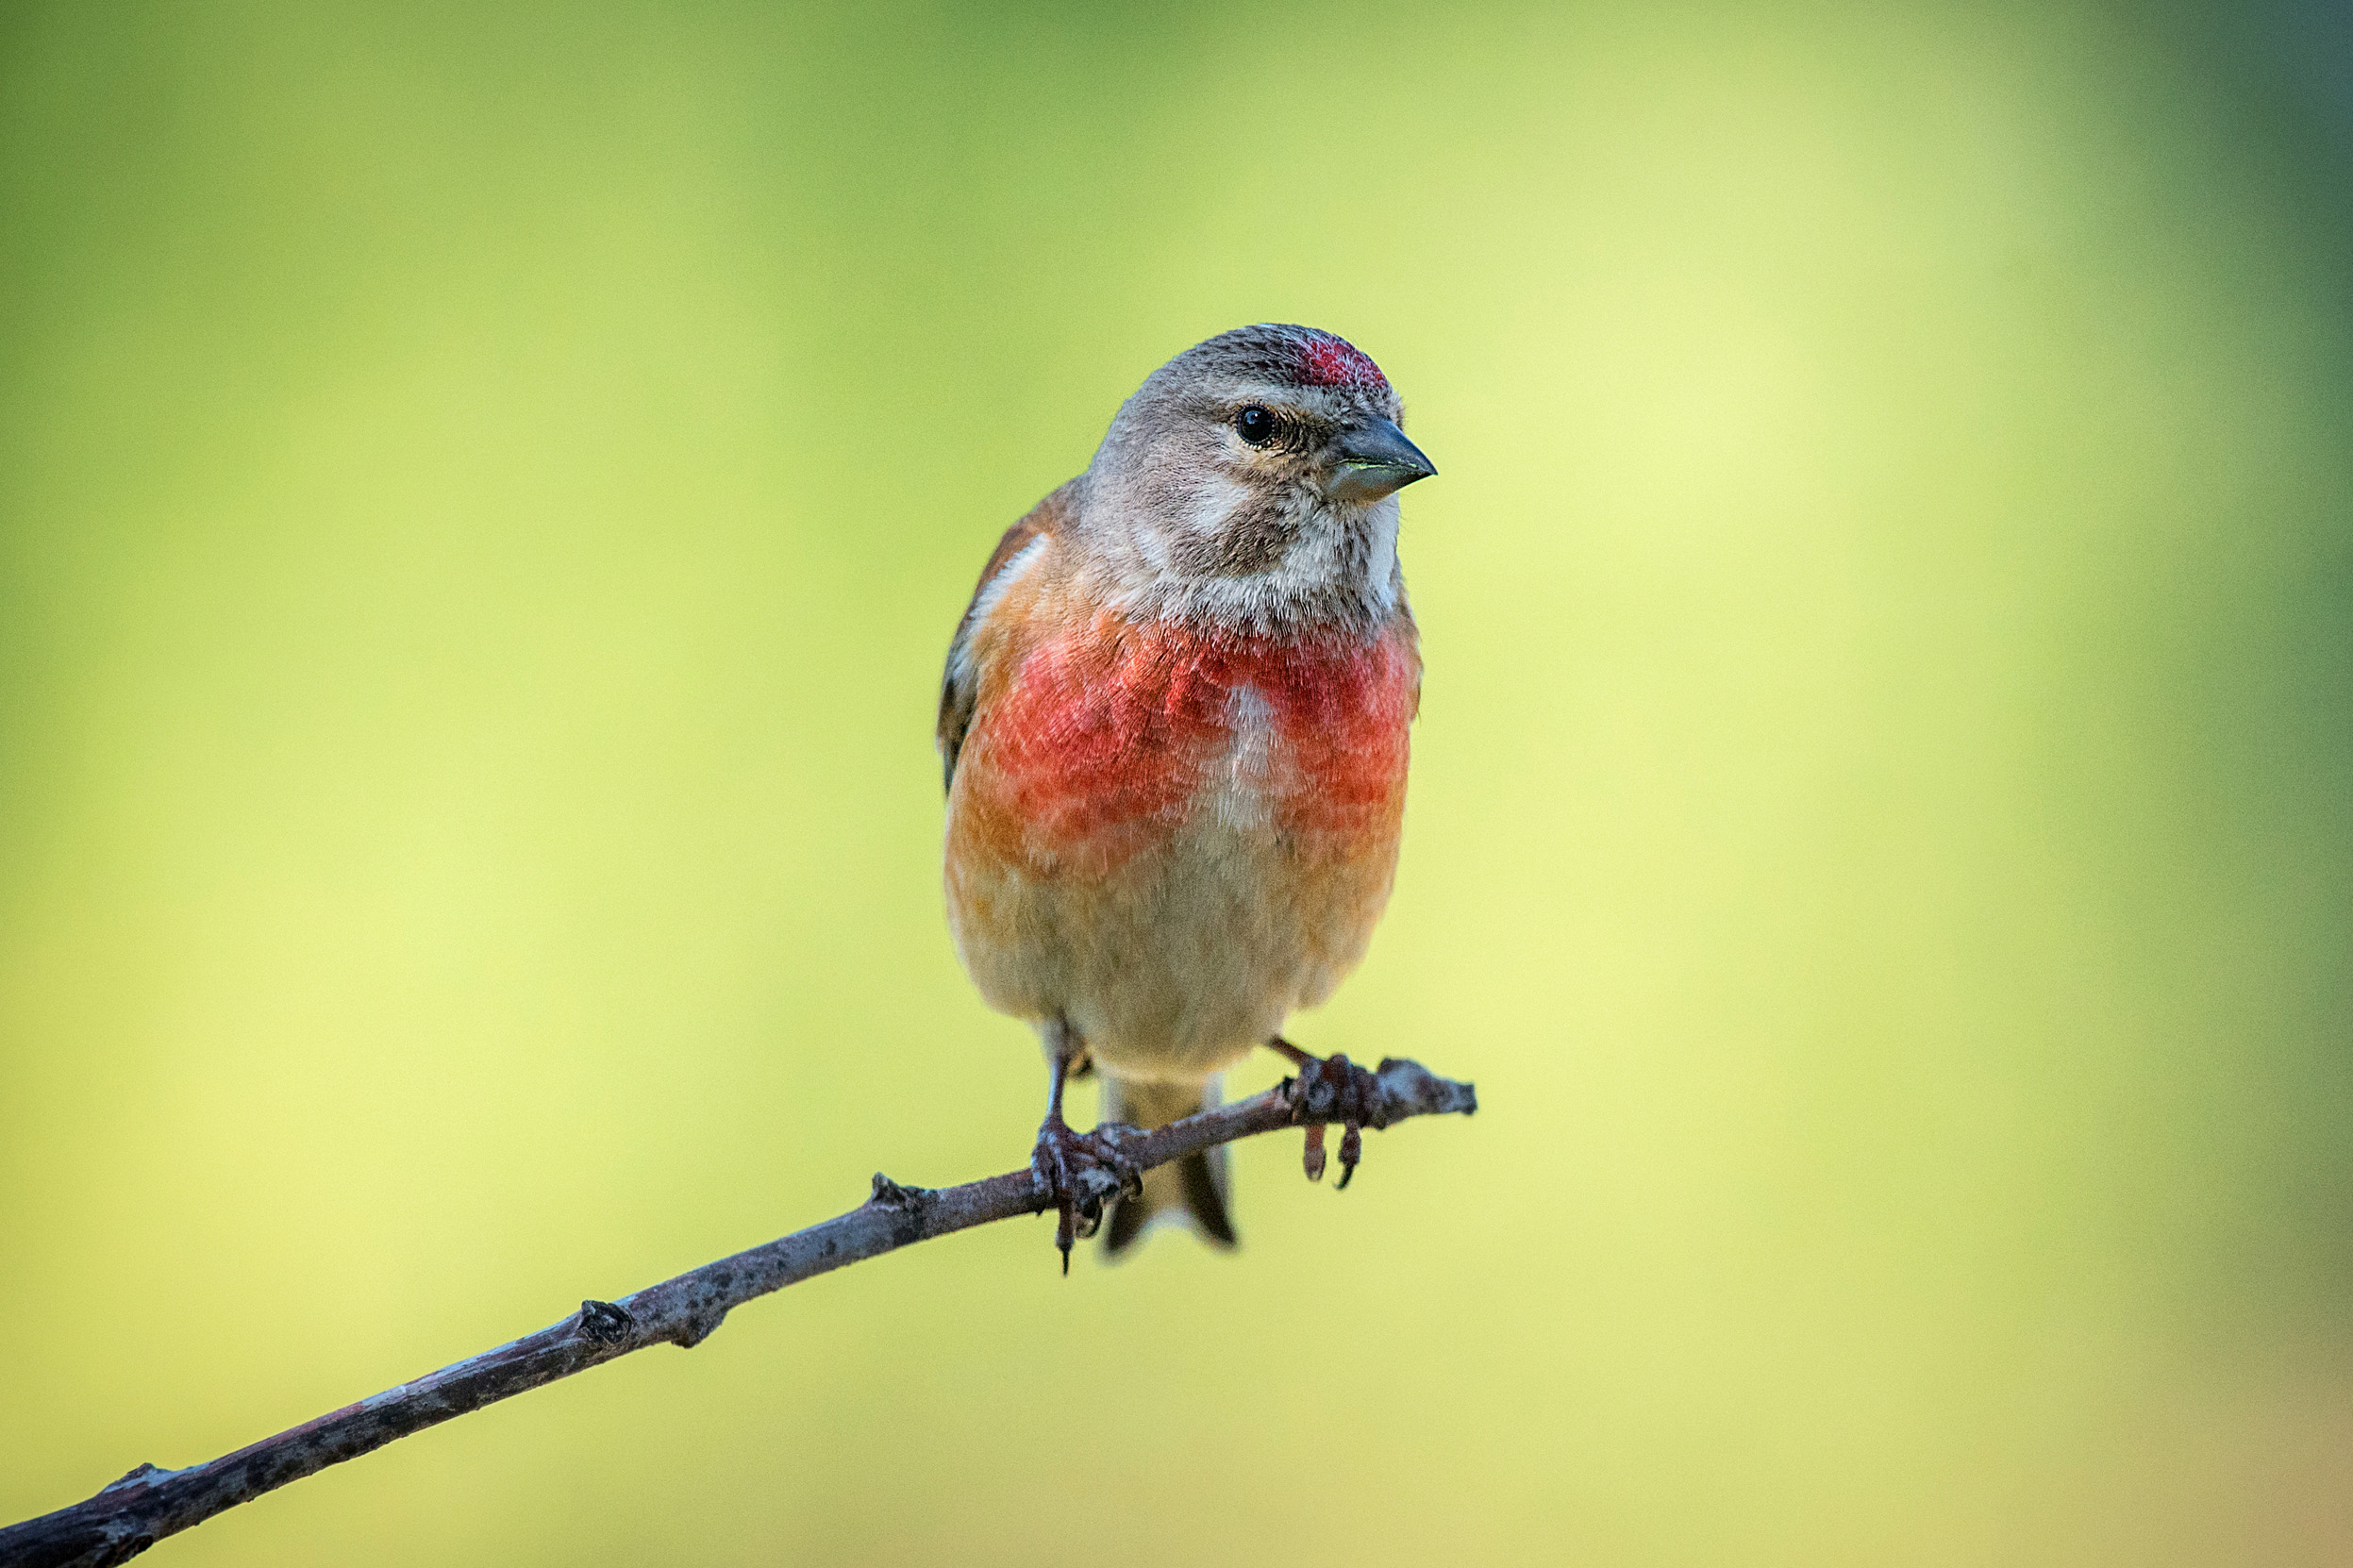 Lone Linnet, perched on a thin branch against blurred greenery.